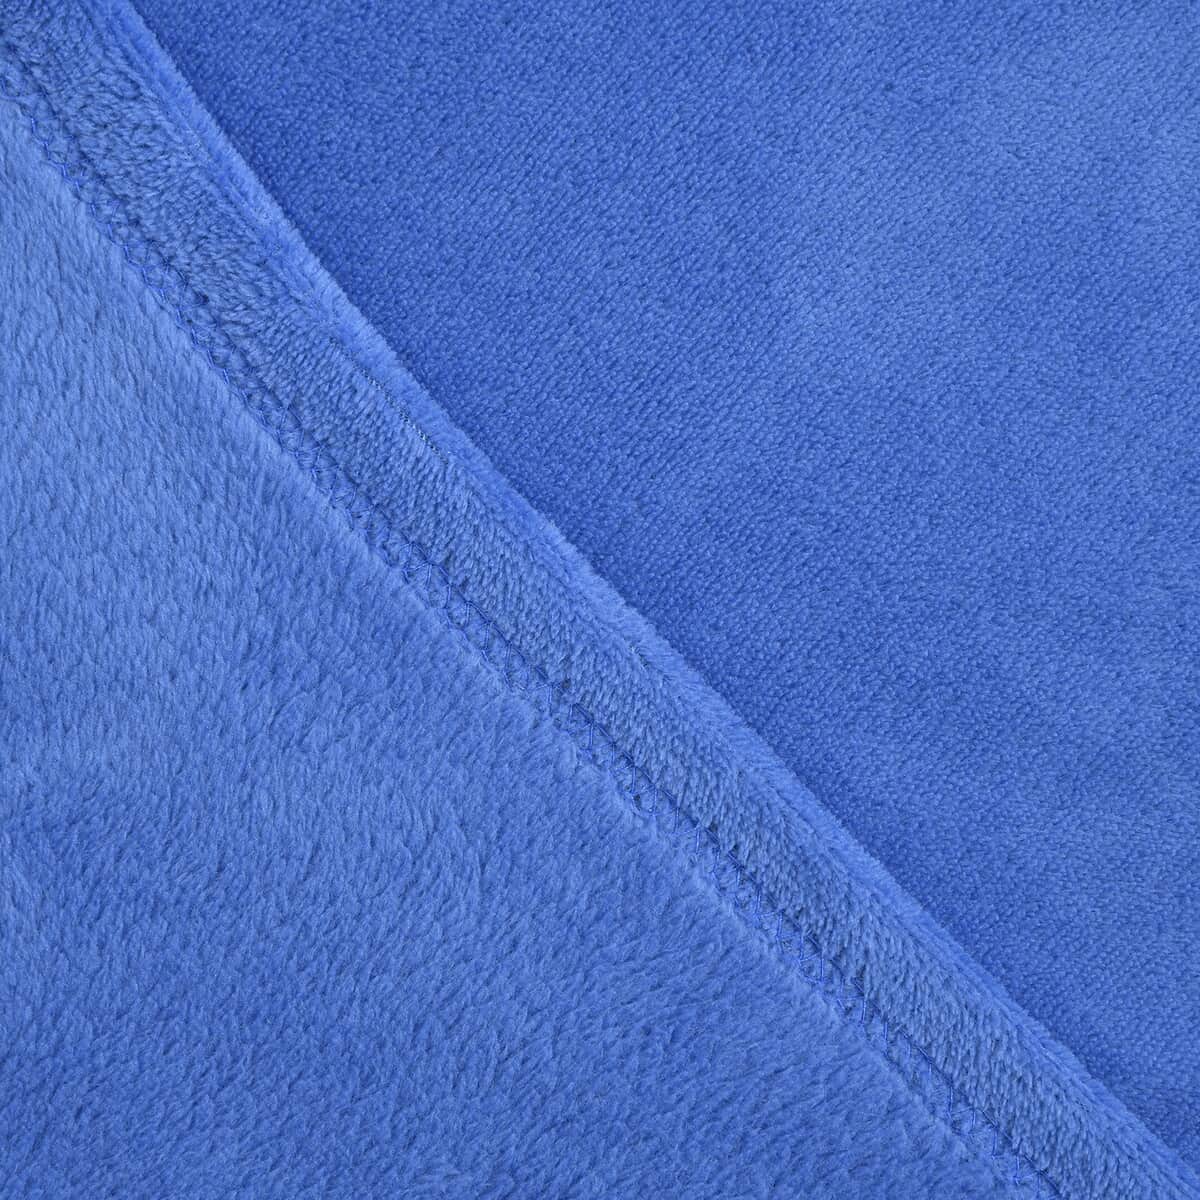 Homesmart Federal Blue Solid Coral Fleece Warmth and Soft Blanket image number 2